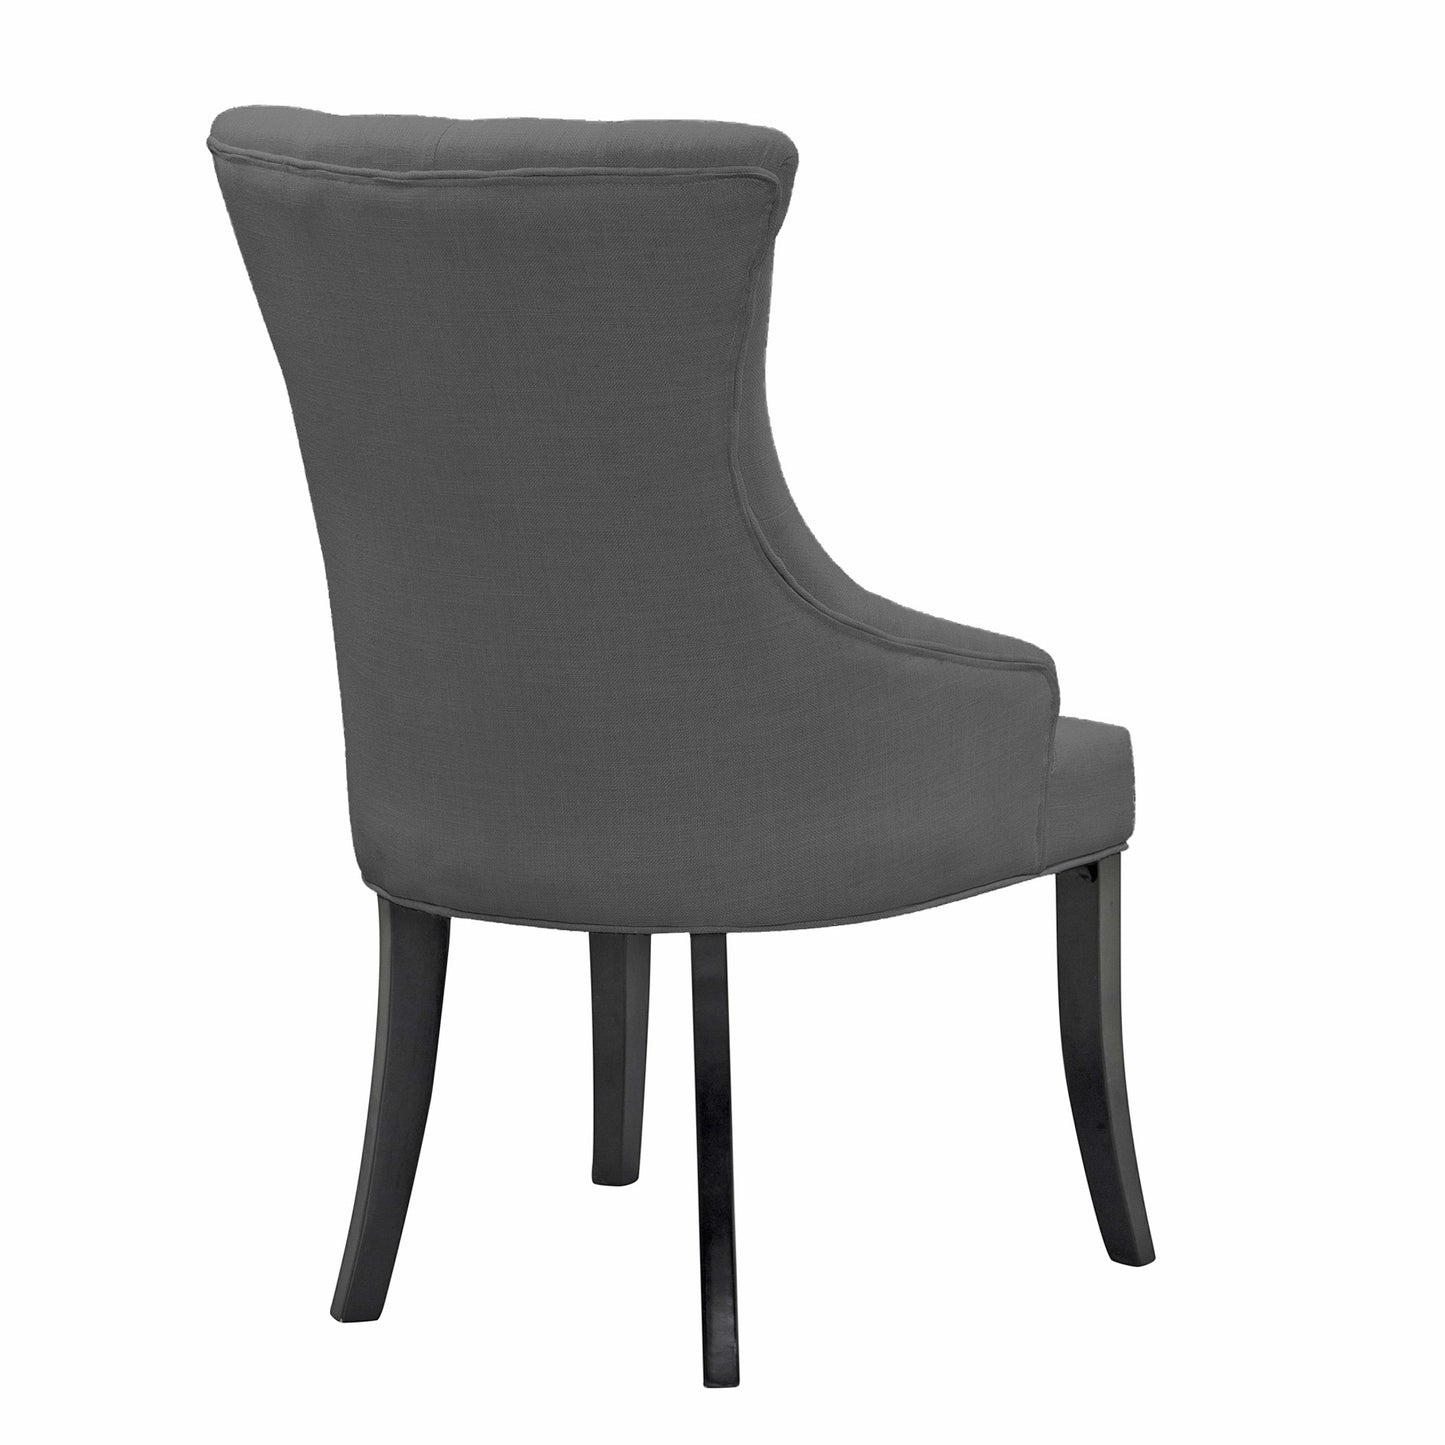 Set of 2 Alei Grey Fabric Dining Chair Wing Chair with Tufted Buttons